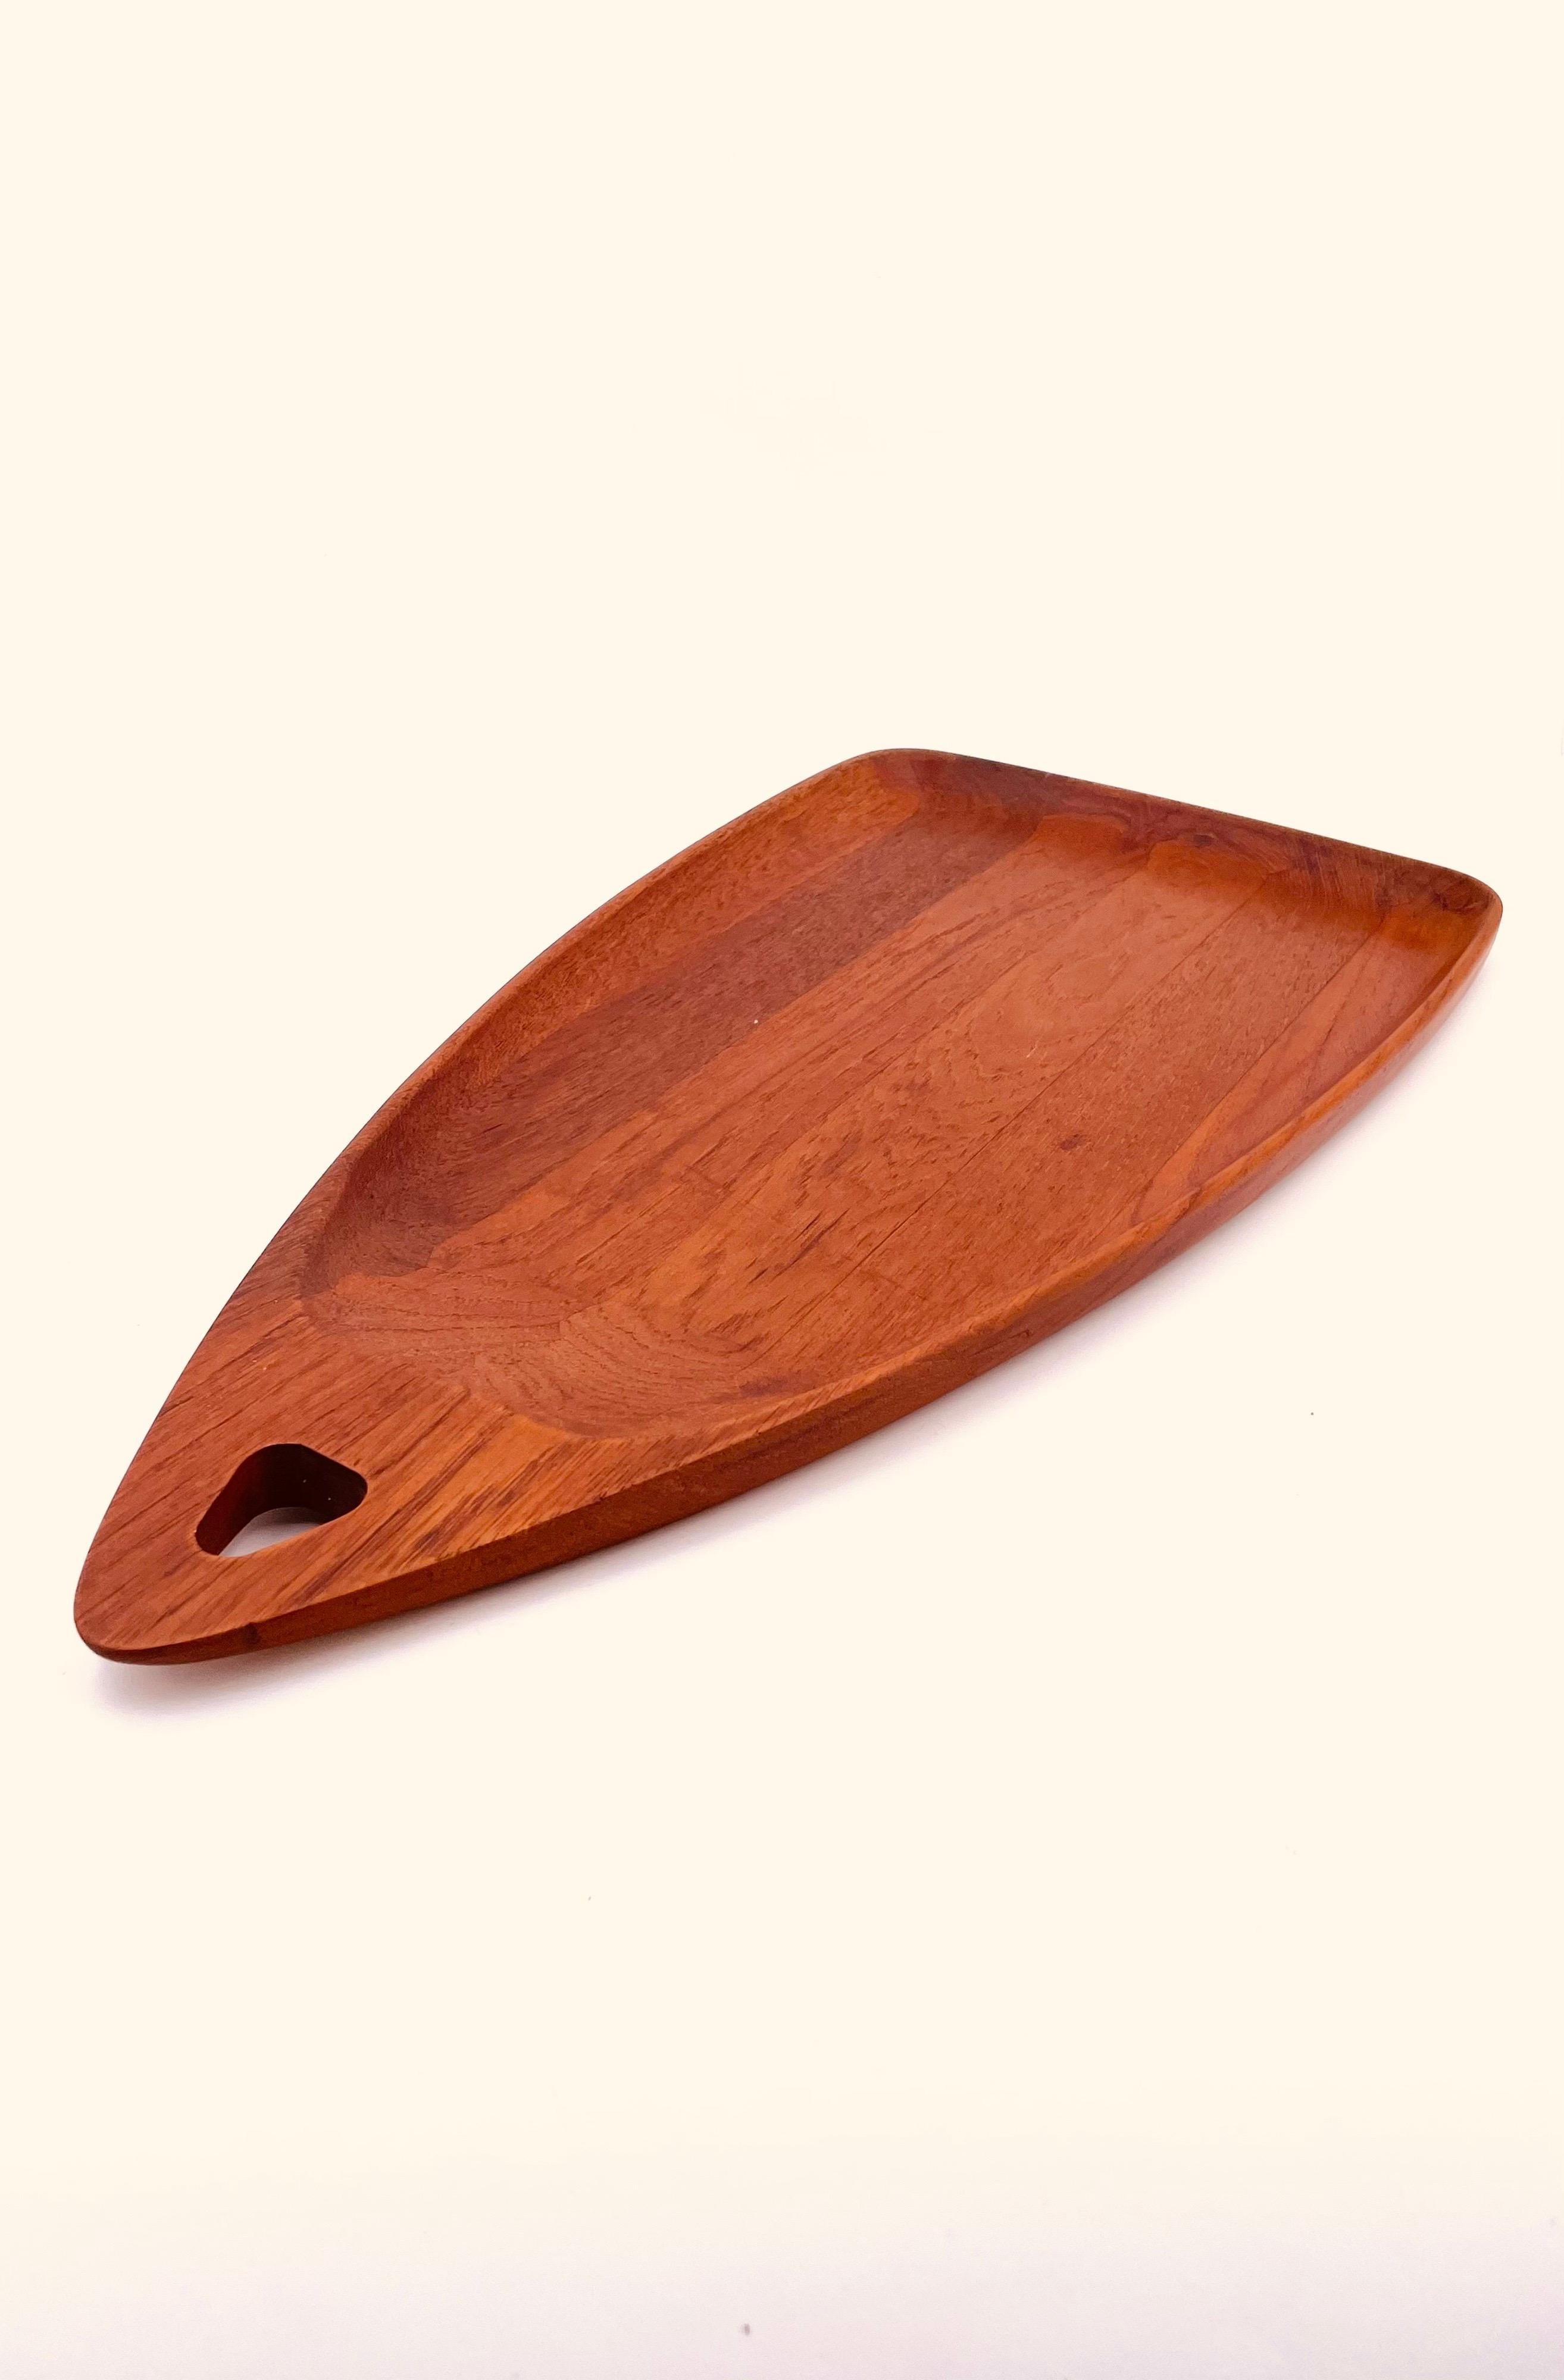 Beautiful rare 1950's solid teak freeform tray, with raised edge and hanging hole stamped at the bottom by Digsmed made in Denmark.